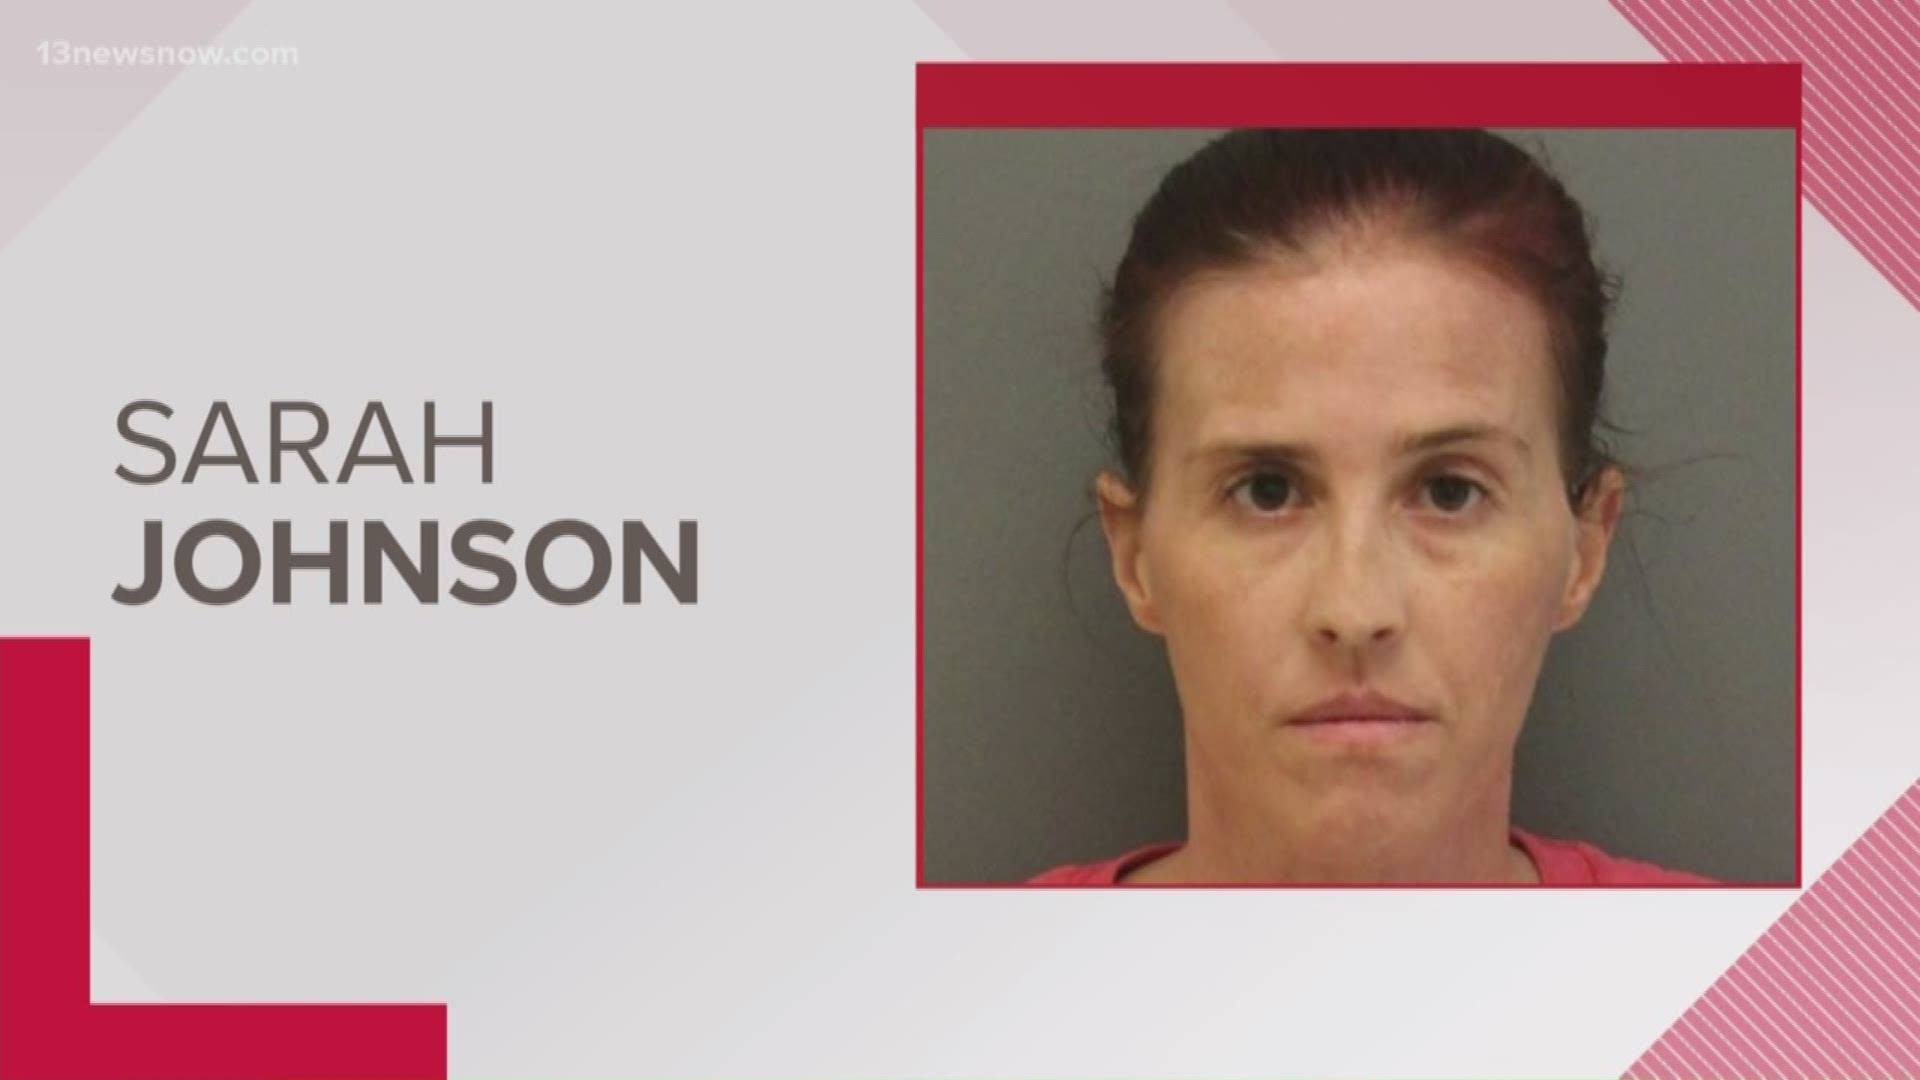 Newport News police arrested a woman who is accused of sexually assaulting a child. Sarah Johnson is charged with abduction, indecent liberties with a child, sodomy, and more.